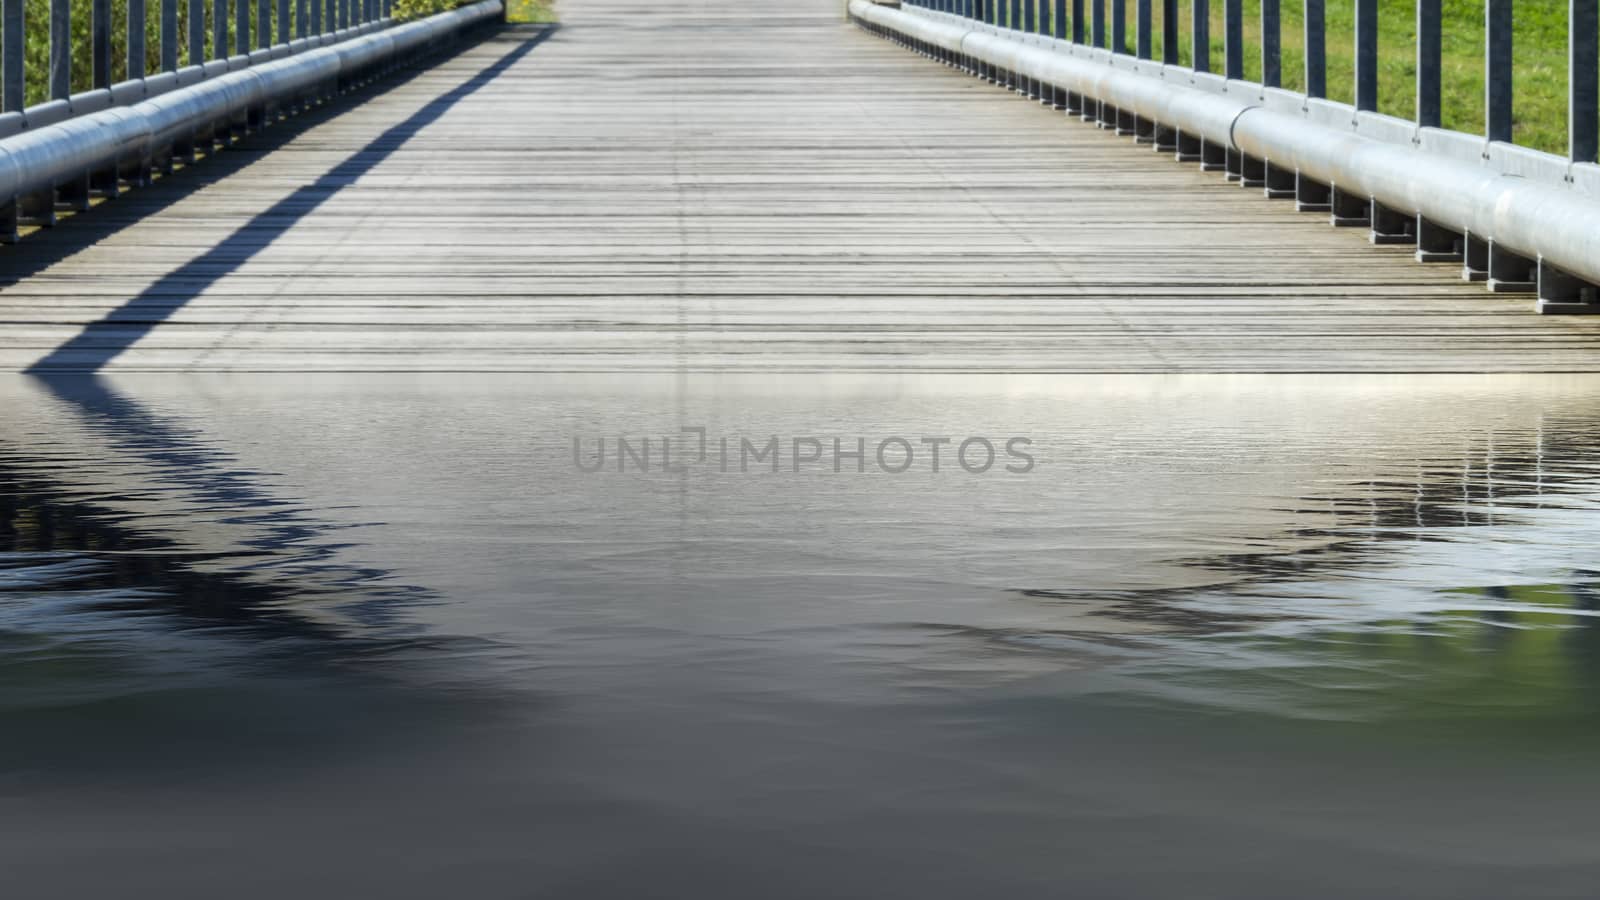 Bridge over a river - National Park on the Elbe by Fr@nk